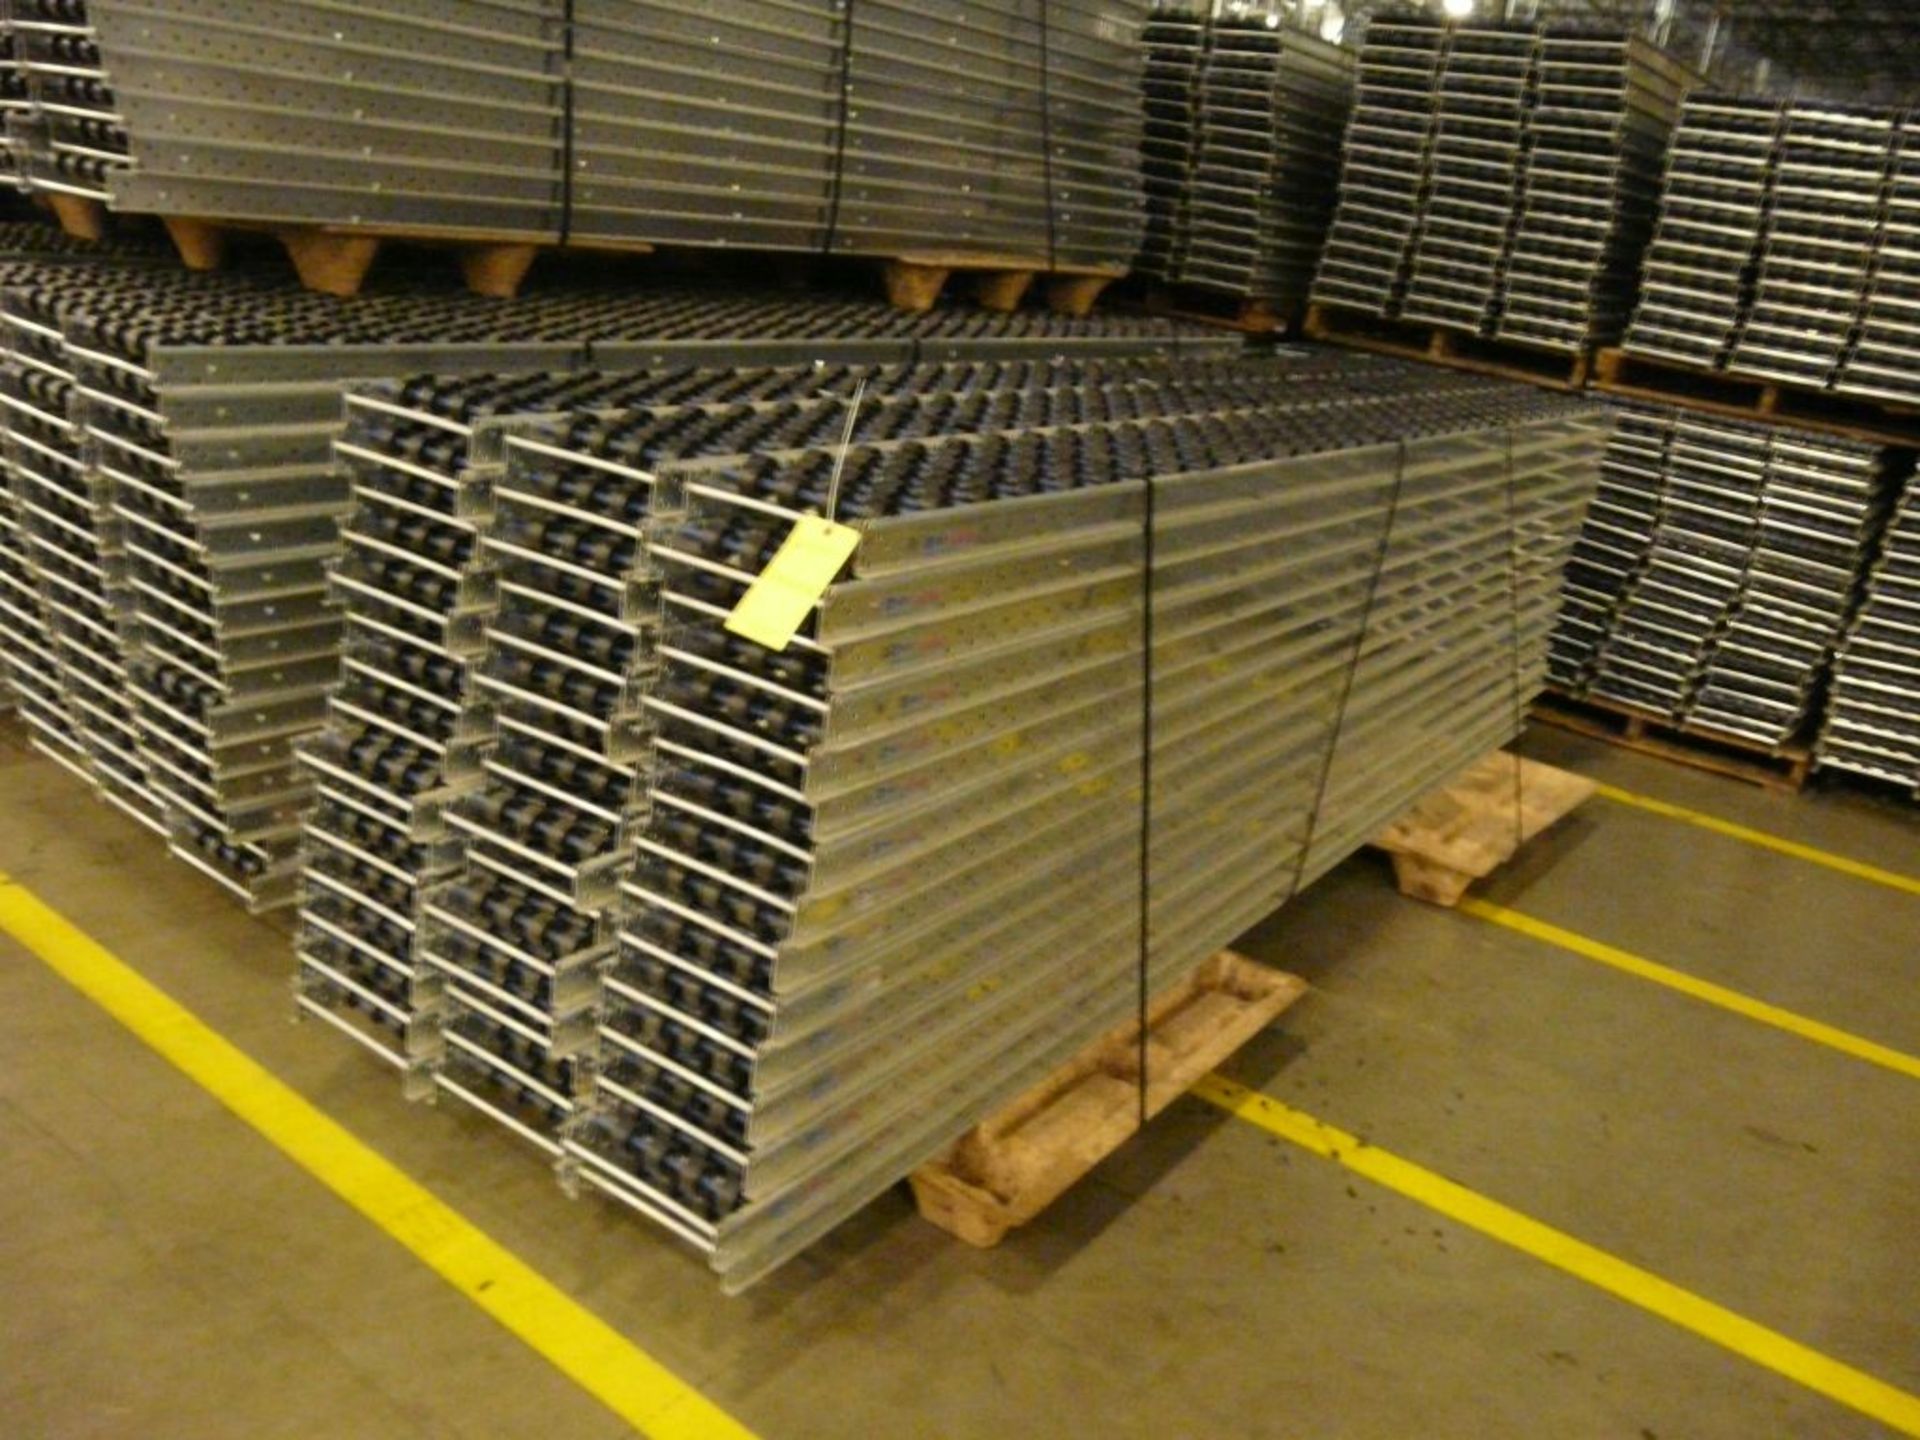 Lot of (90) SpanTrack Wheelbed Carton Flow Conveyors - 11.5'L x 11"W; Tag: 223627 - $30 Lot